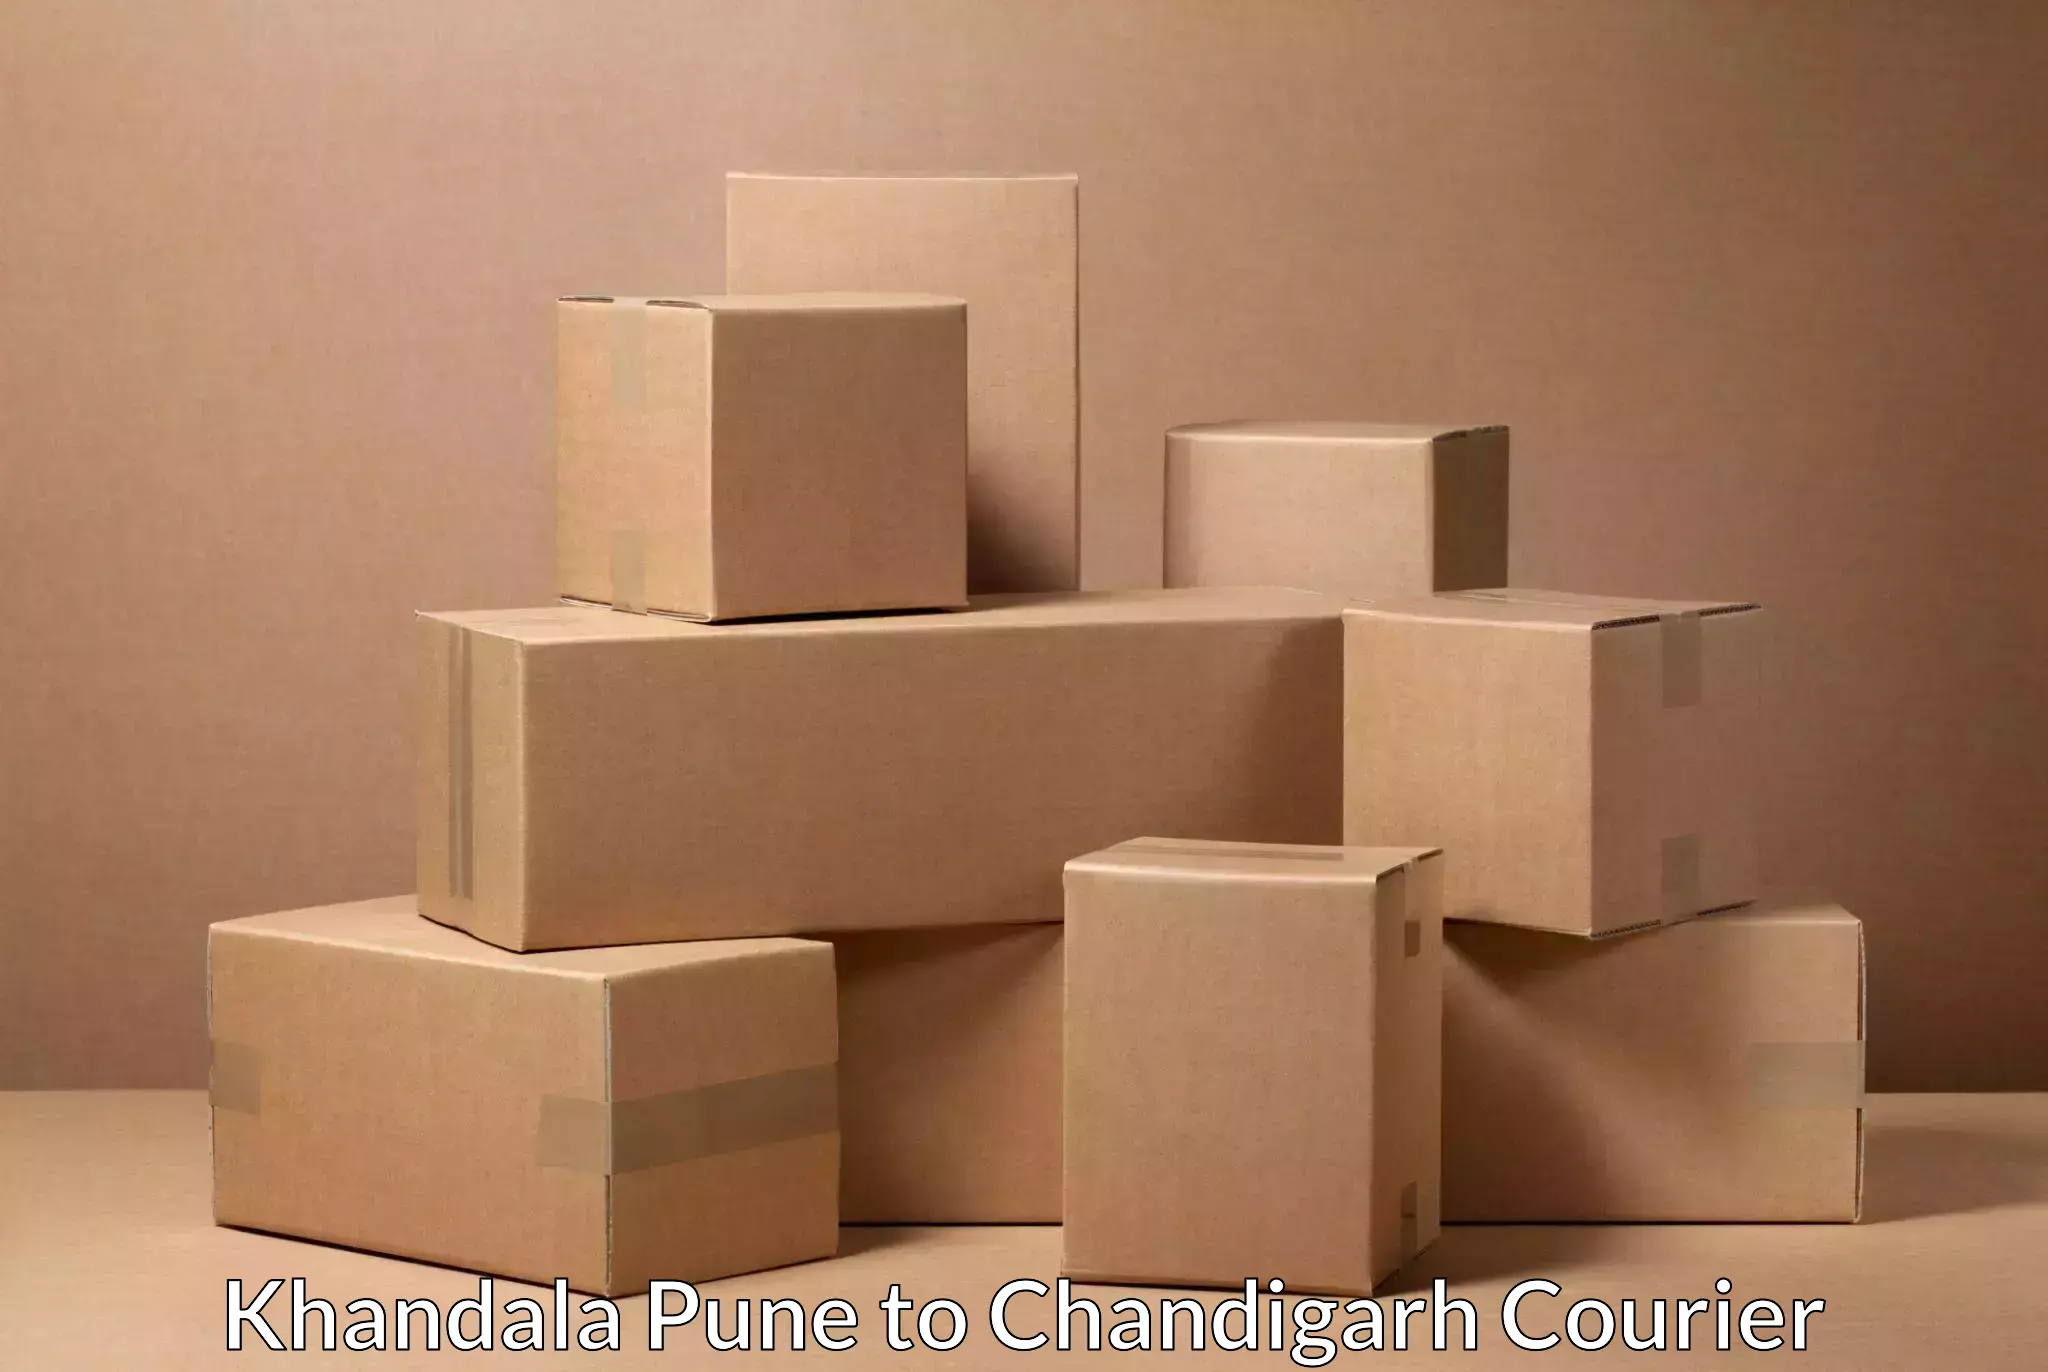 Customer-oriented courier services Khandala Pune to Chandigarh